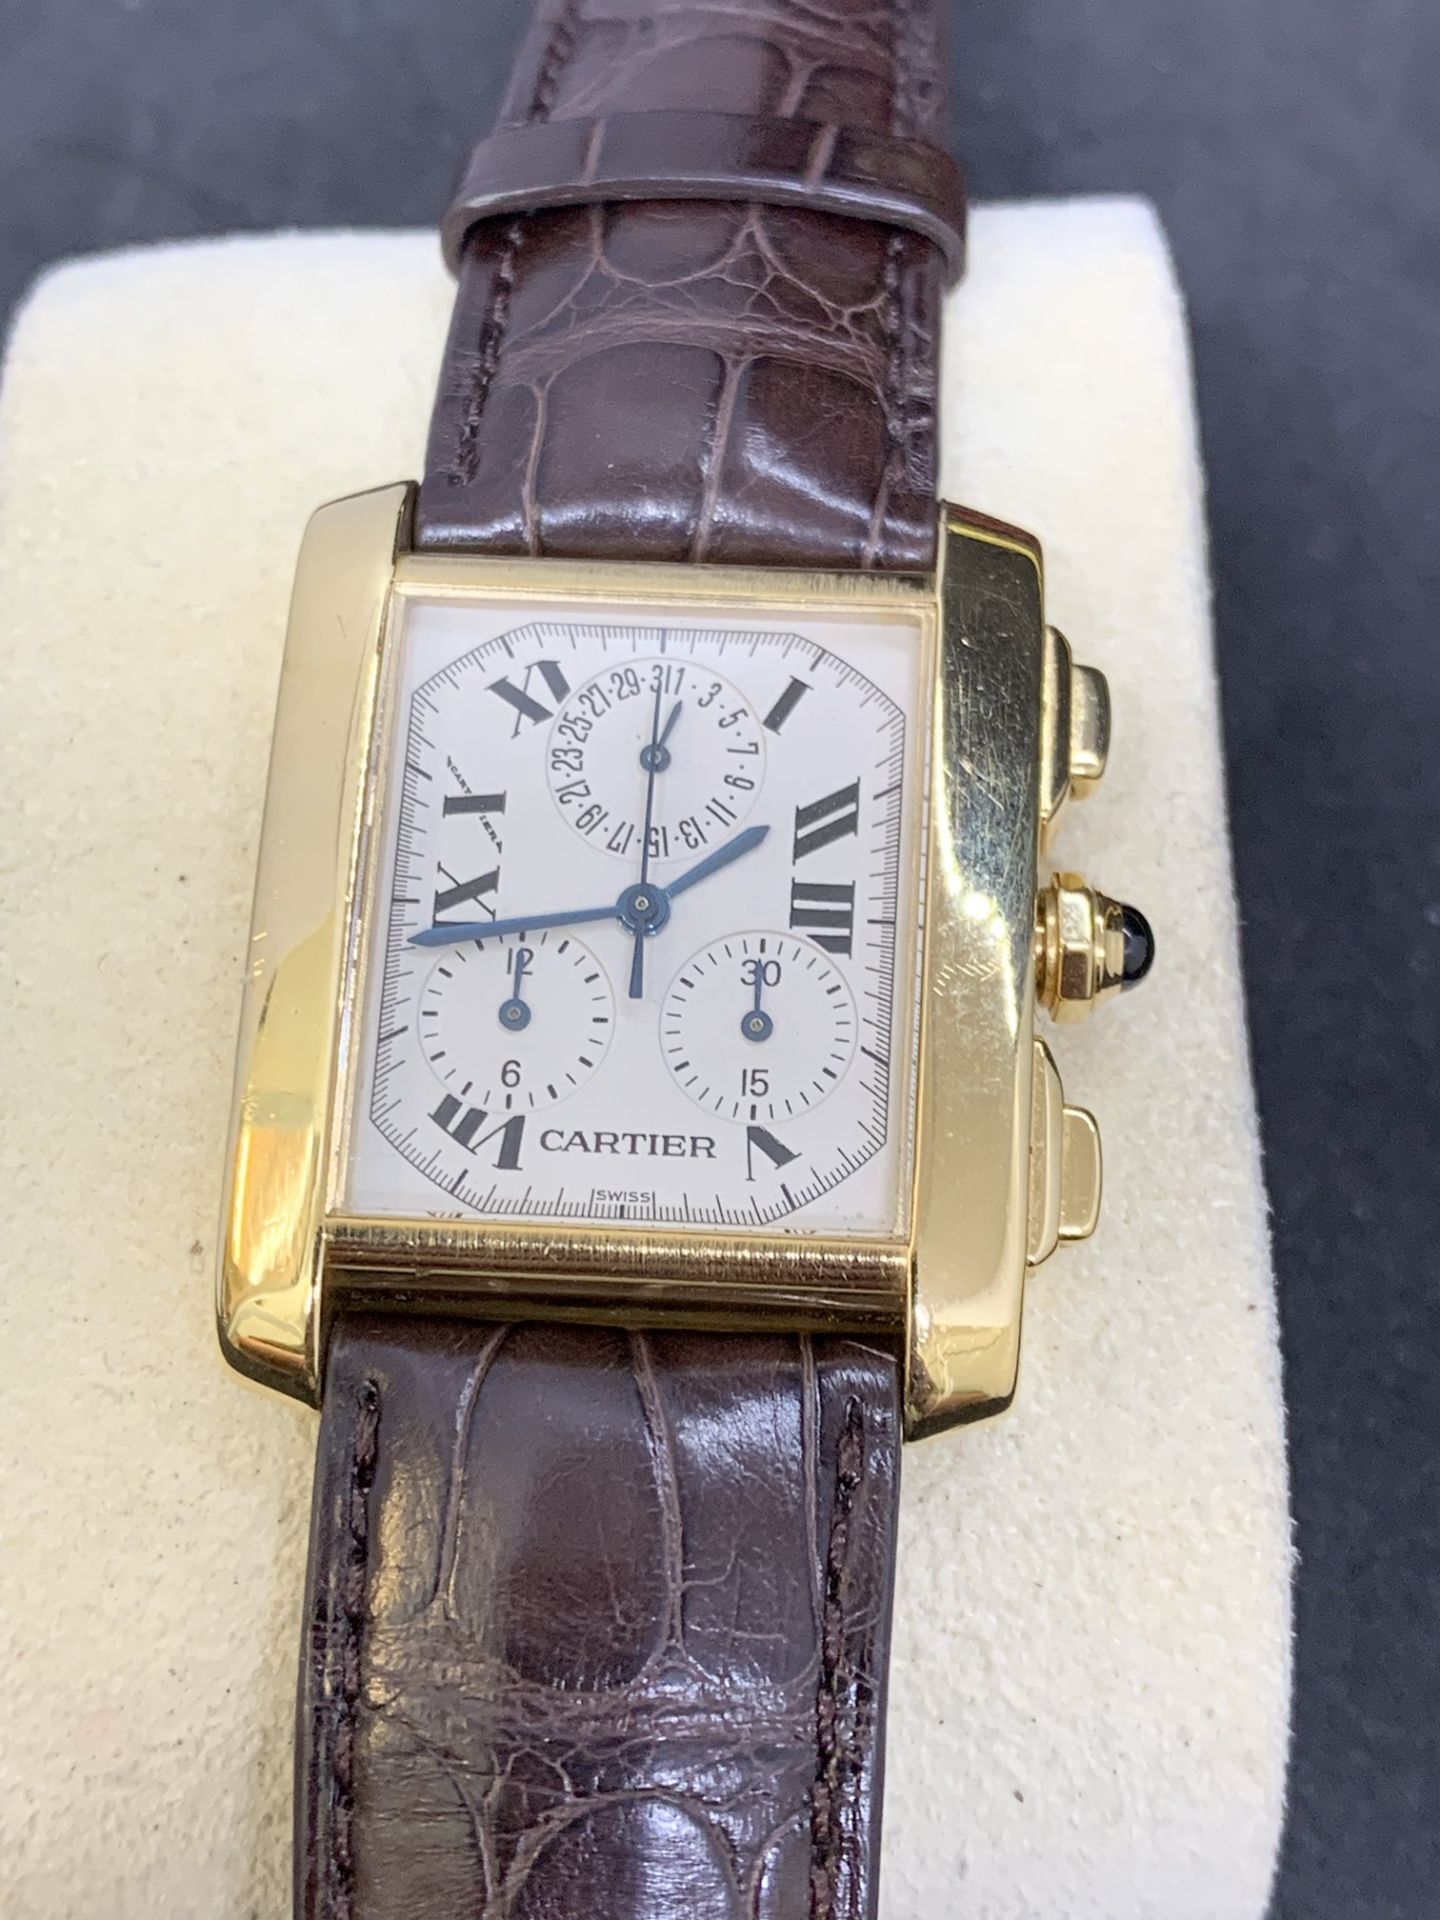 CARTIER 18ct GOLD CHRONOGRAPH WATCH - Image 2 of 11